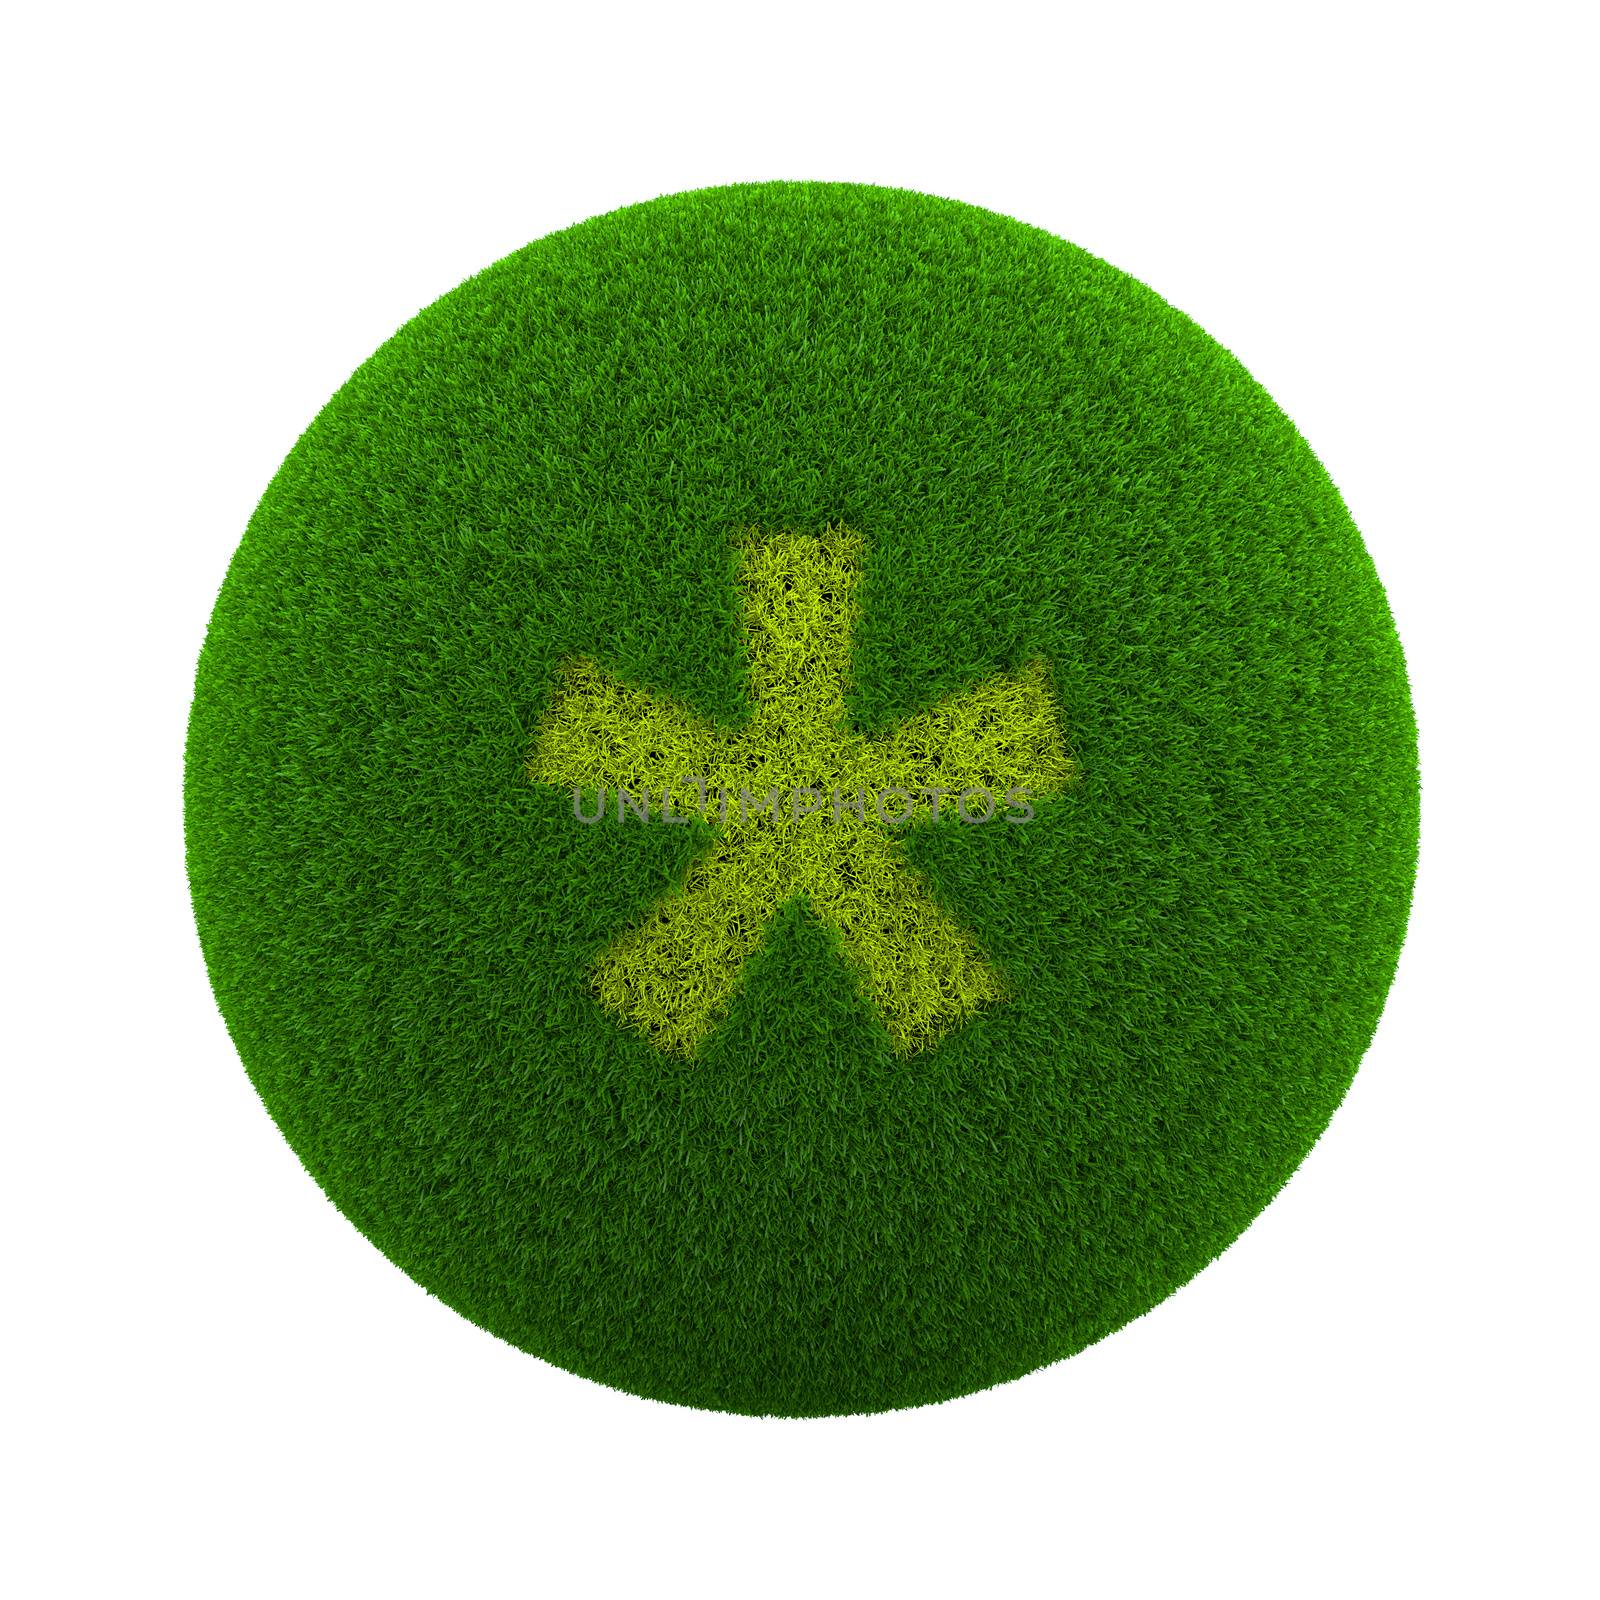 Grass Sphere Asterisk Icon by make